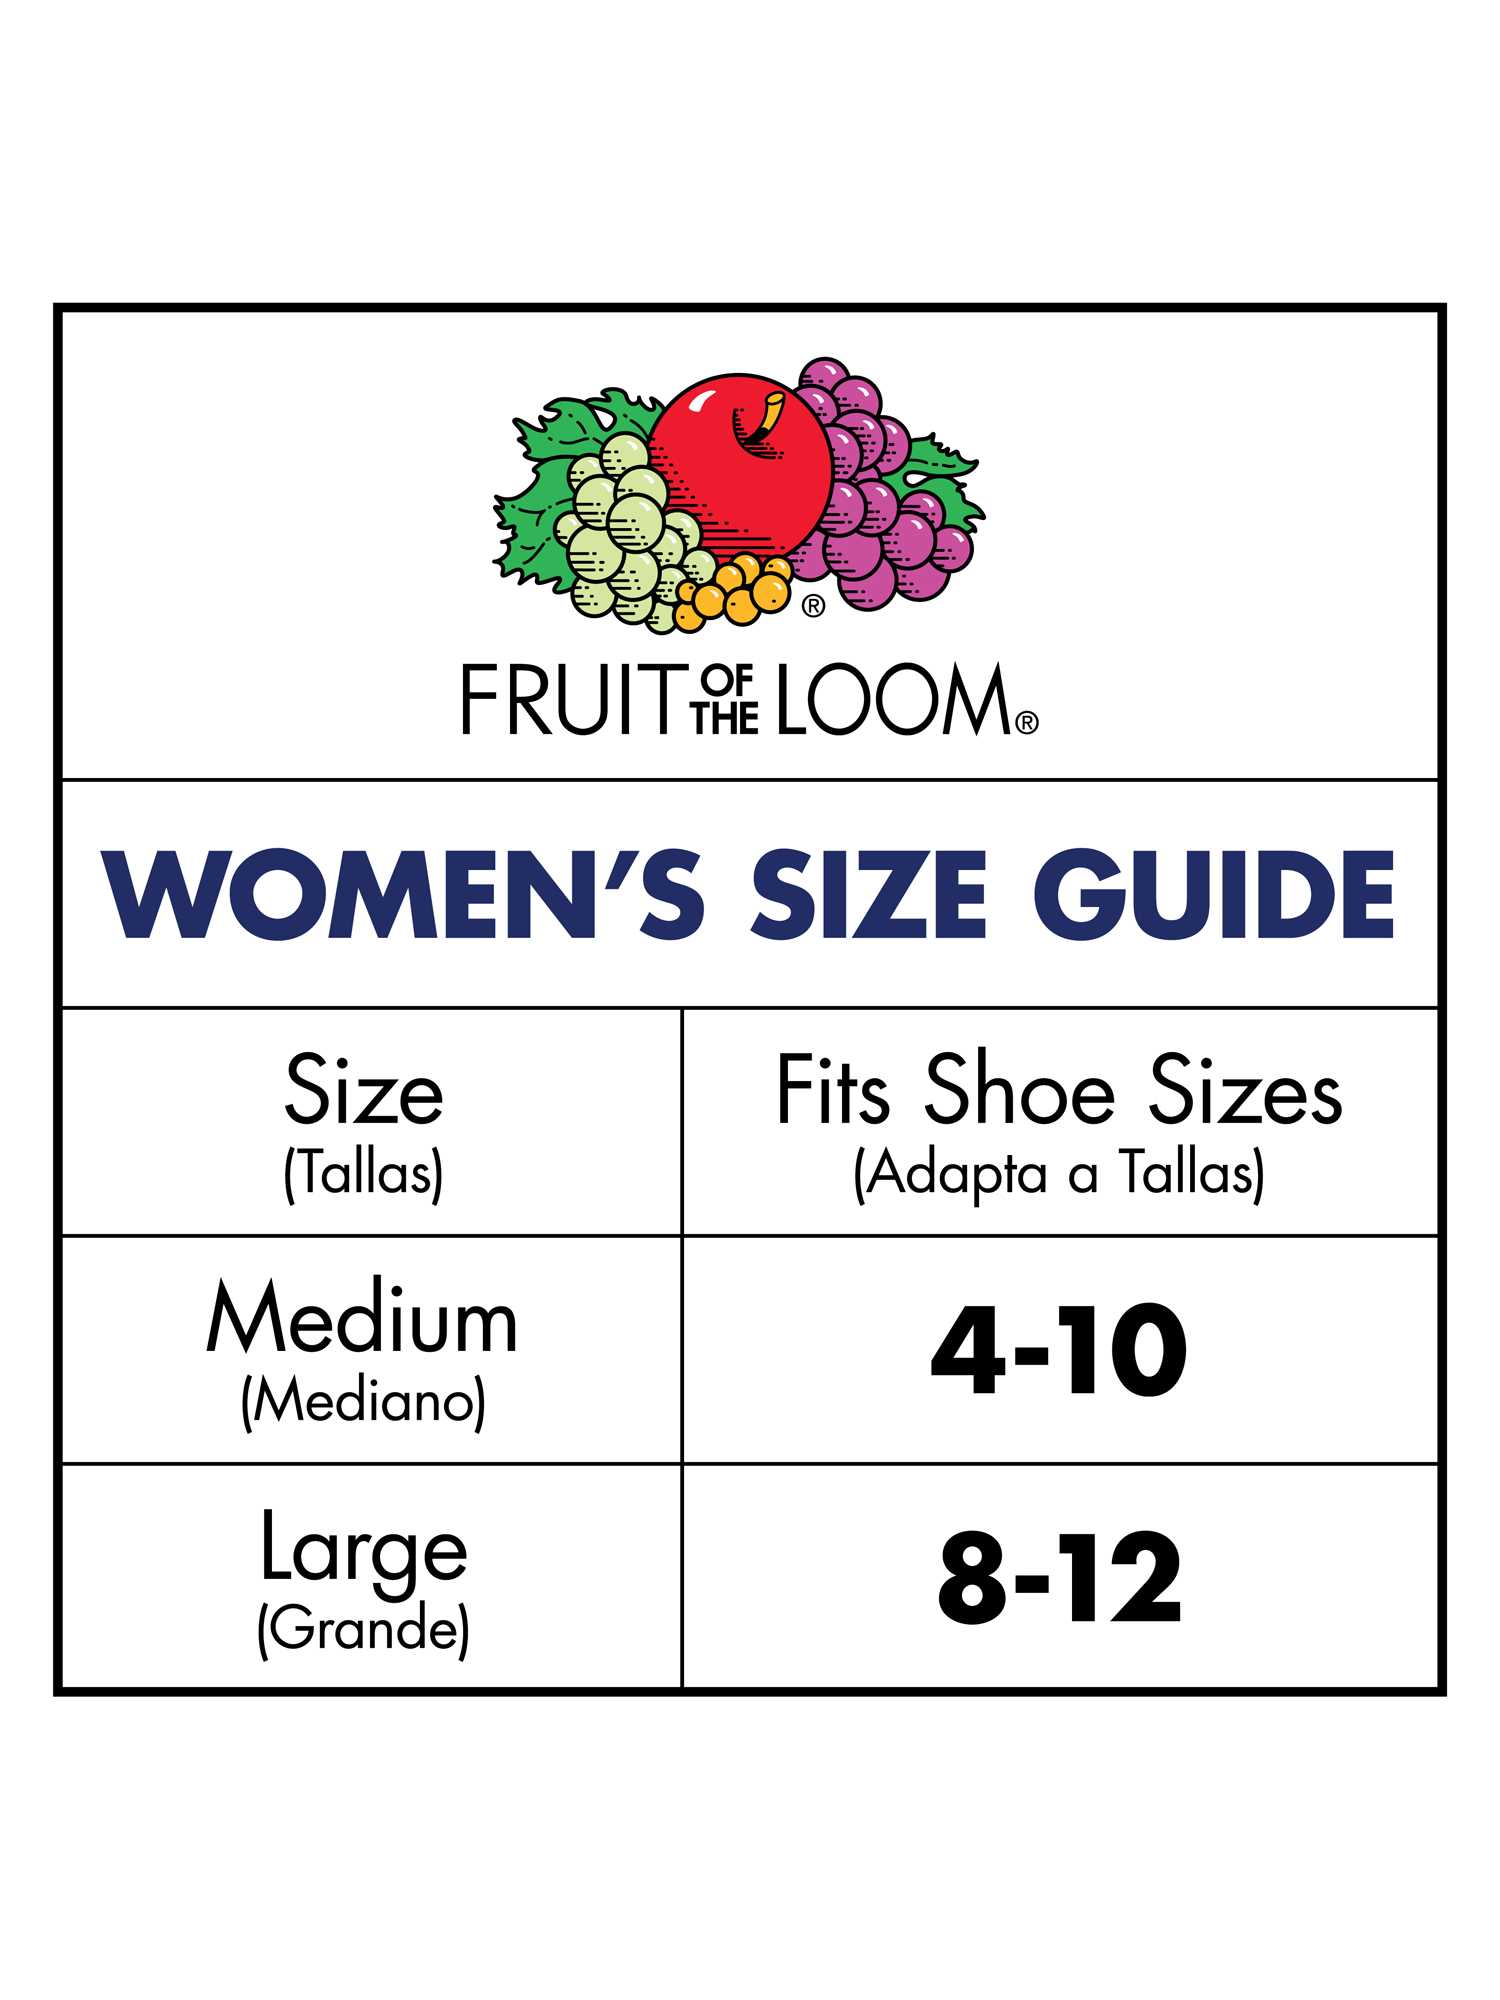 Fruit of the Loom Women's CoolZone Cotton Lightweight No Show Socks, 6 Pack - image 4 of 6